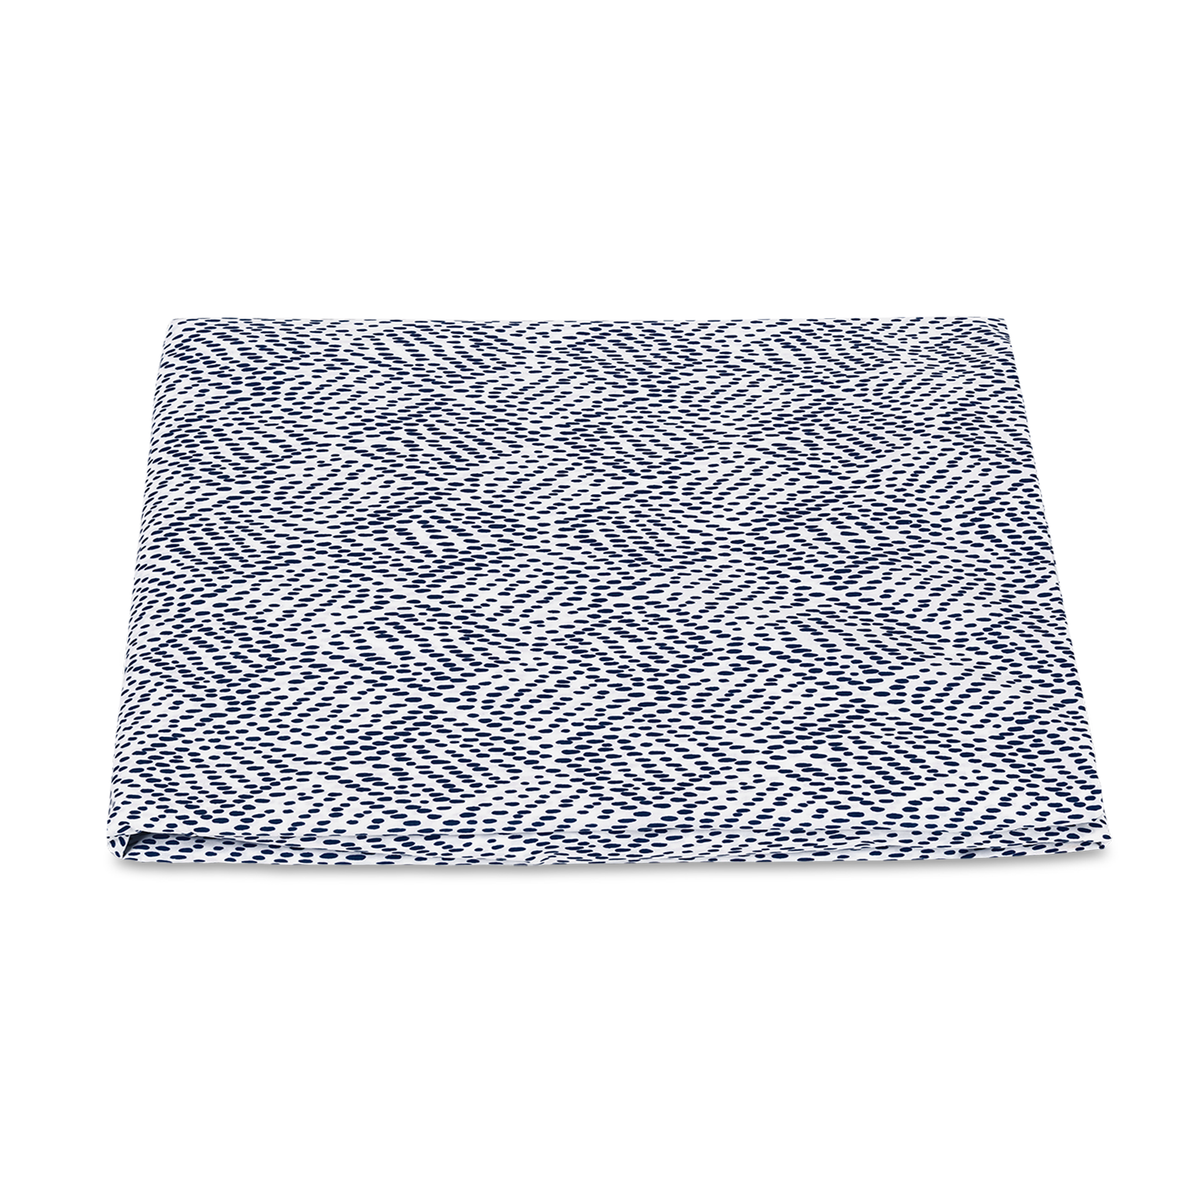 Folded Fitted Sheet of Matouk Duma Diamond Bedding in Navy Color